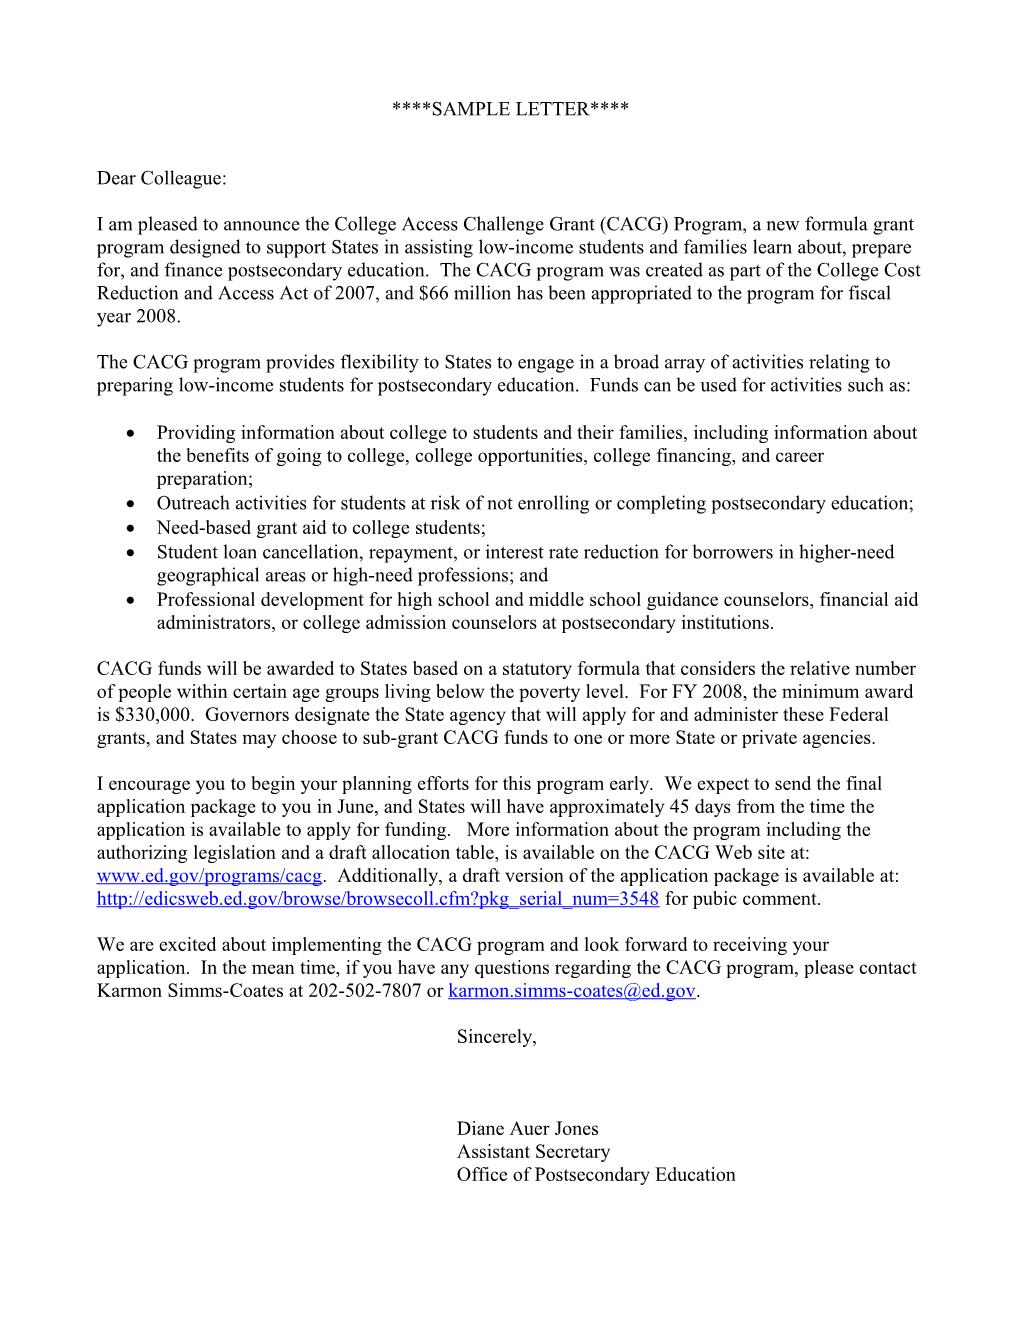 Sample Dear Colleague Letter for the College Access Challenge Grant Program (MS Word)